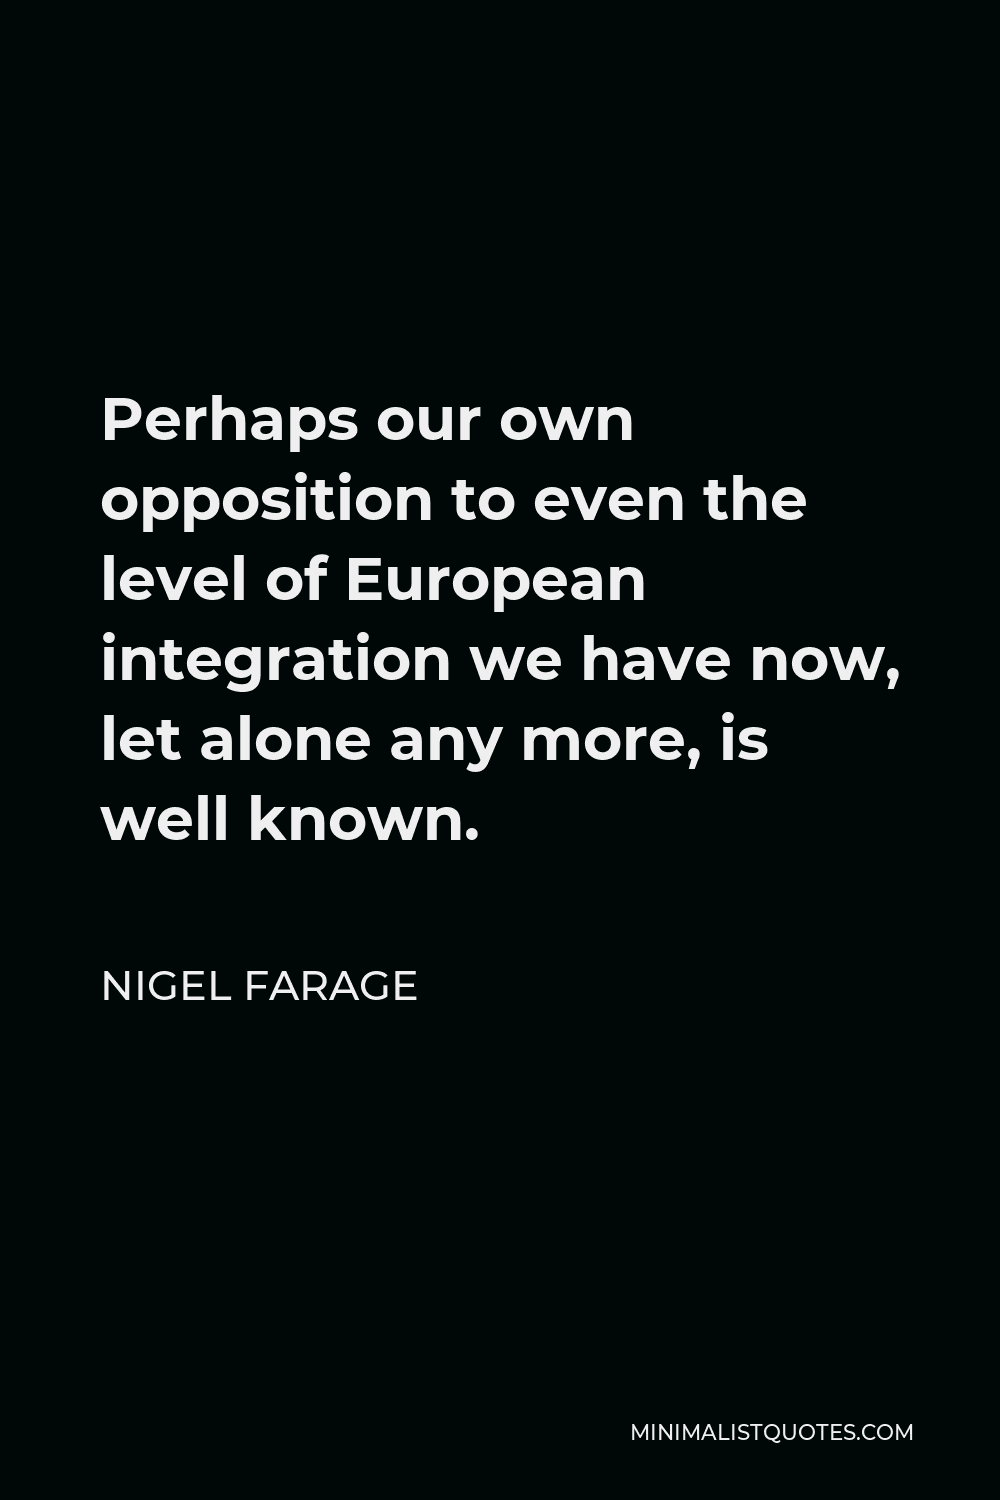 Nigel Farage Quote - Perhaps our own opposition to even the level of European integration we have now, let alone any more, is well known.